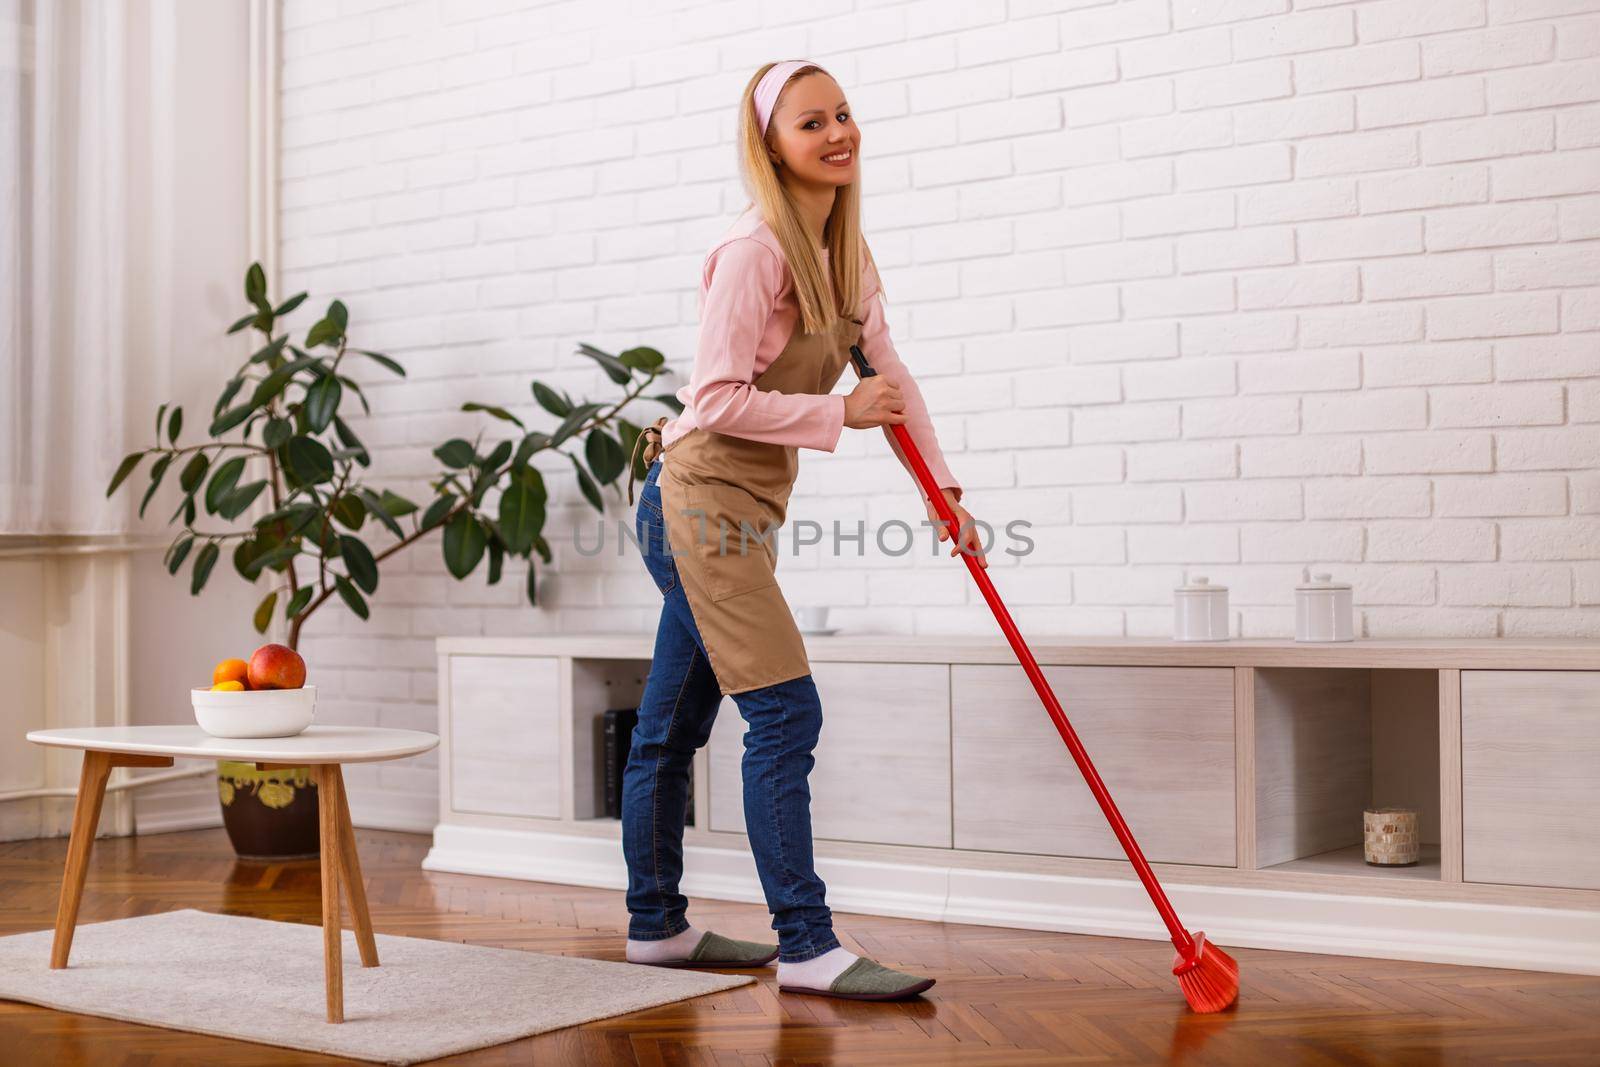 Beautiful housewife cleaning with broom her home.